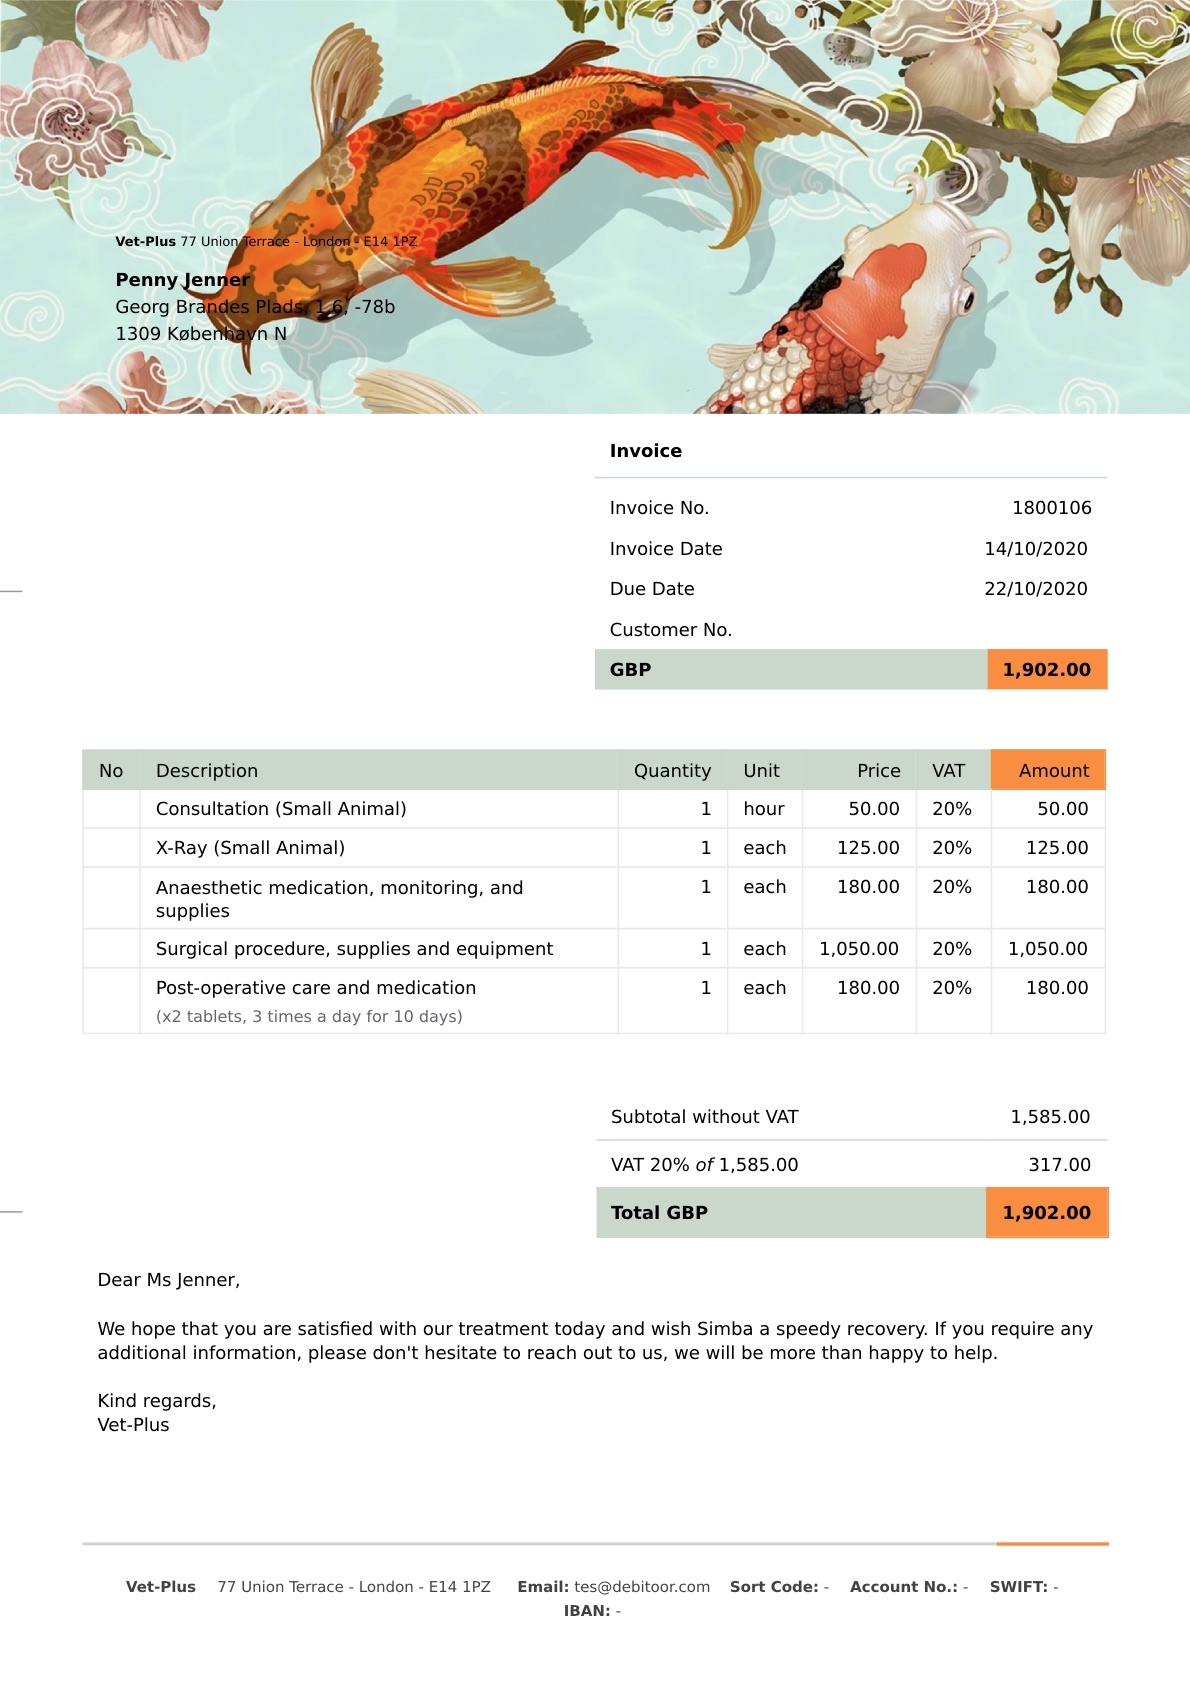 Here is an example of a vet invoice created with invoicing software